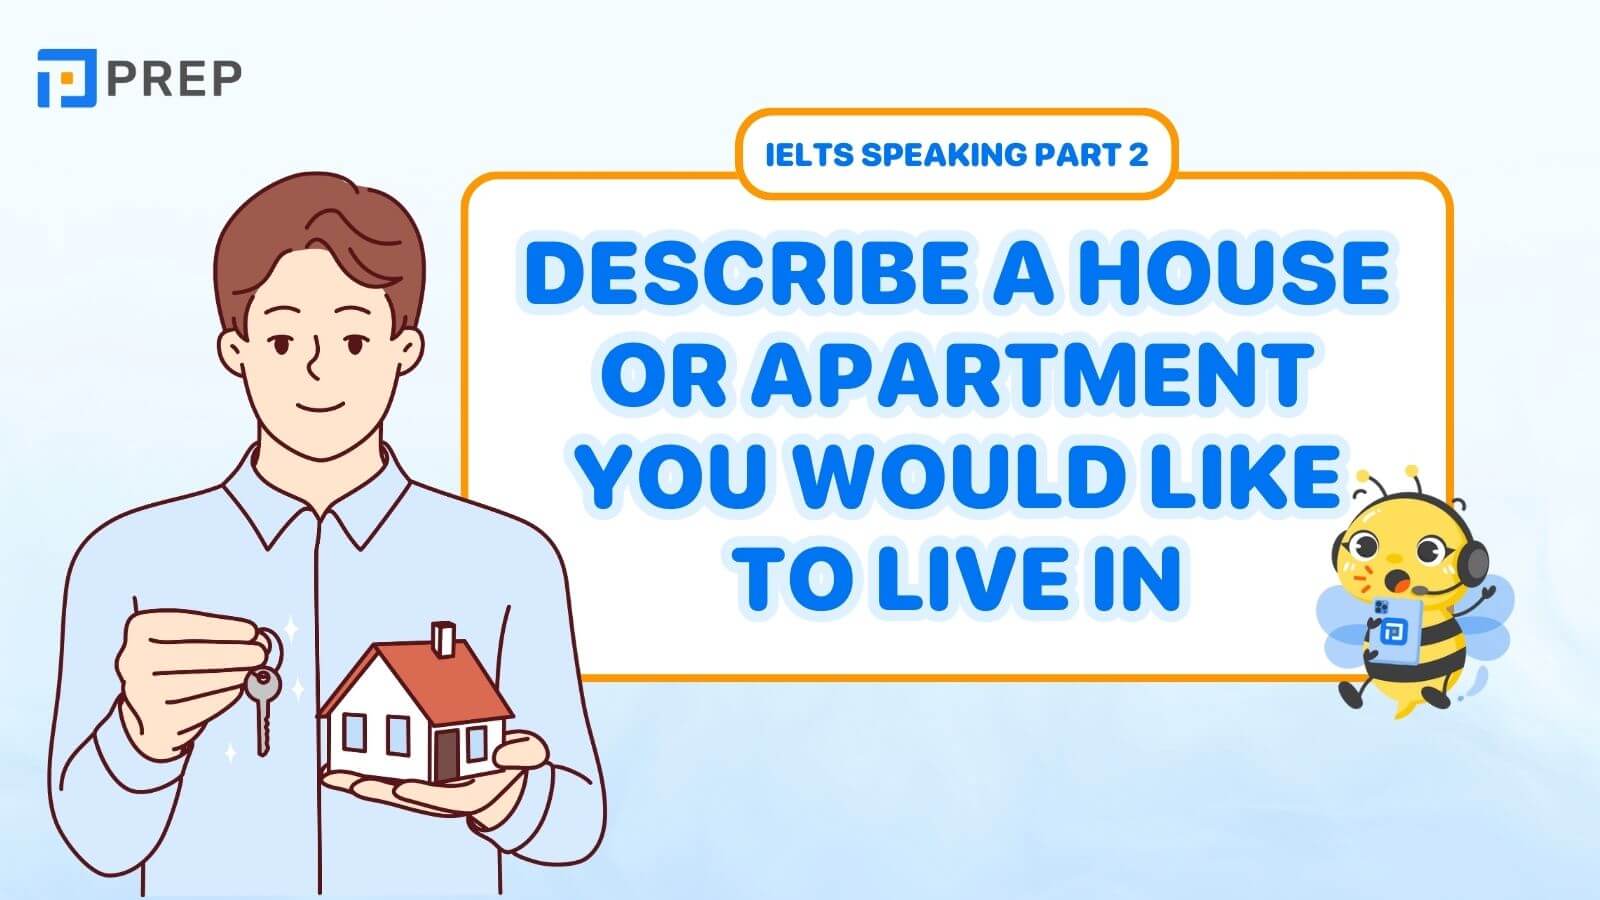 Describe a house or apartment you would like to live